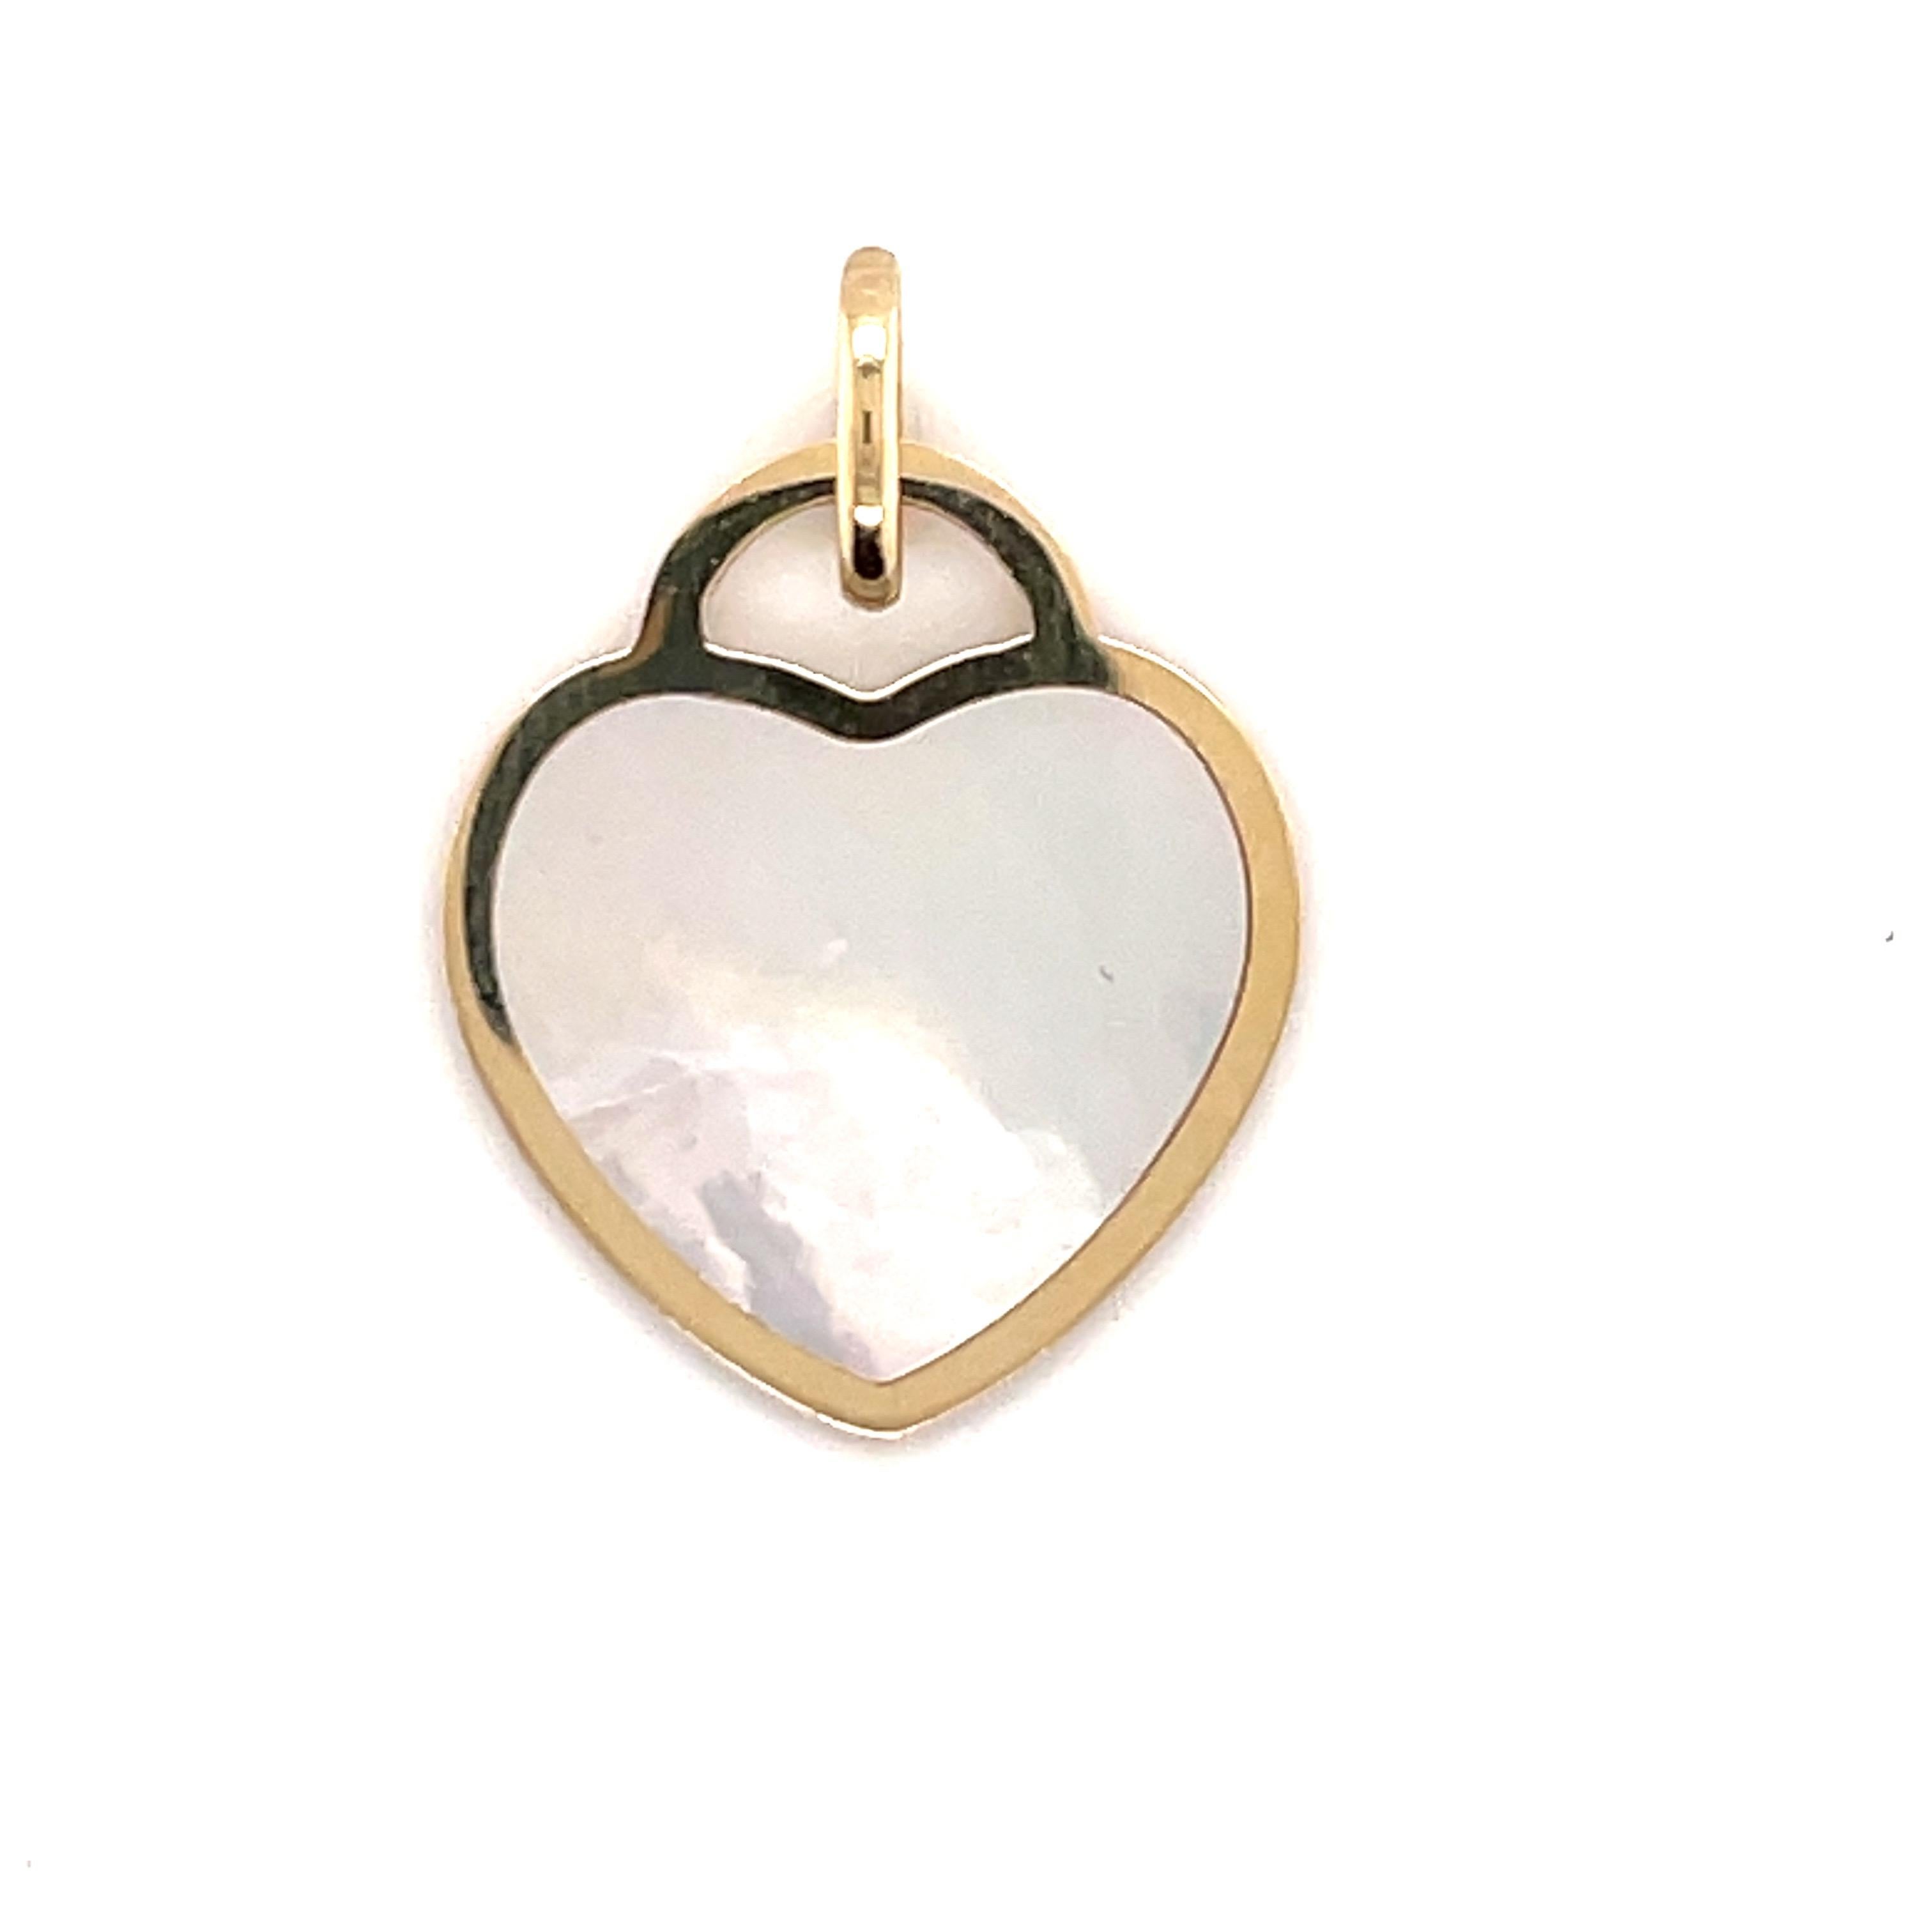 Italian 14K Yellow gold heart pendant featuring an onyx or mother of pearl center with yellow gold trim.
Can mix and match pendant/necklace. 
Heart comes in different colors. 
Paperclip necklaces are available and more fashion necklaces.
Build your